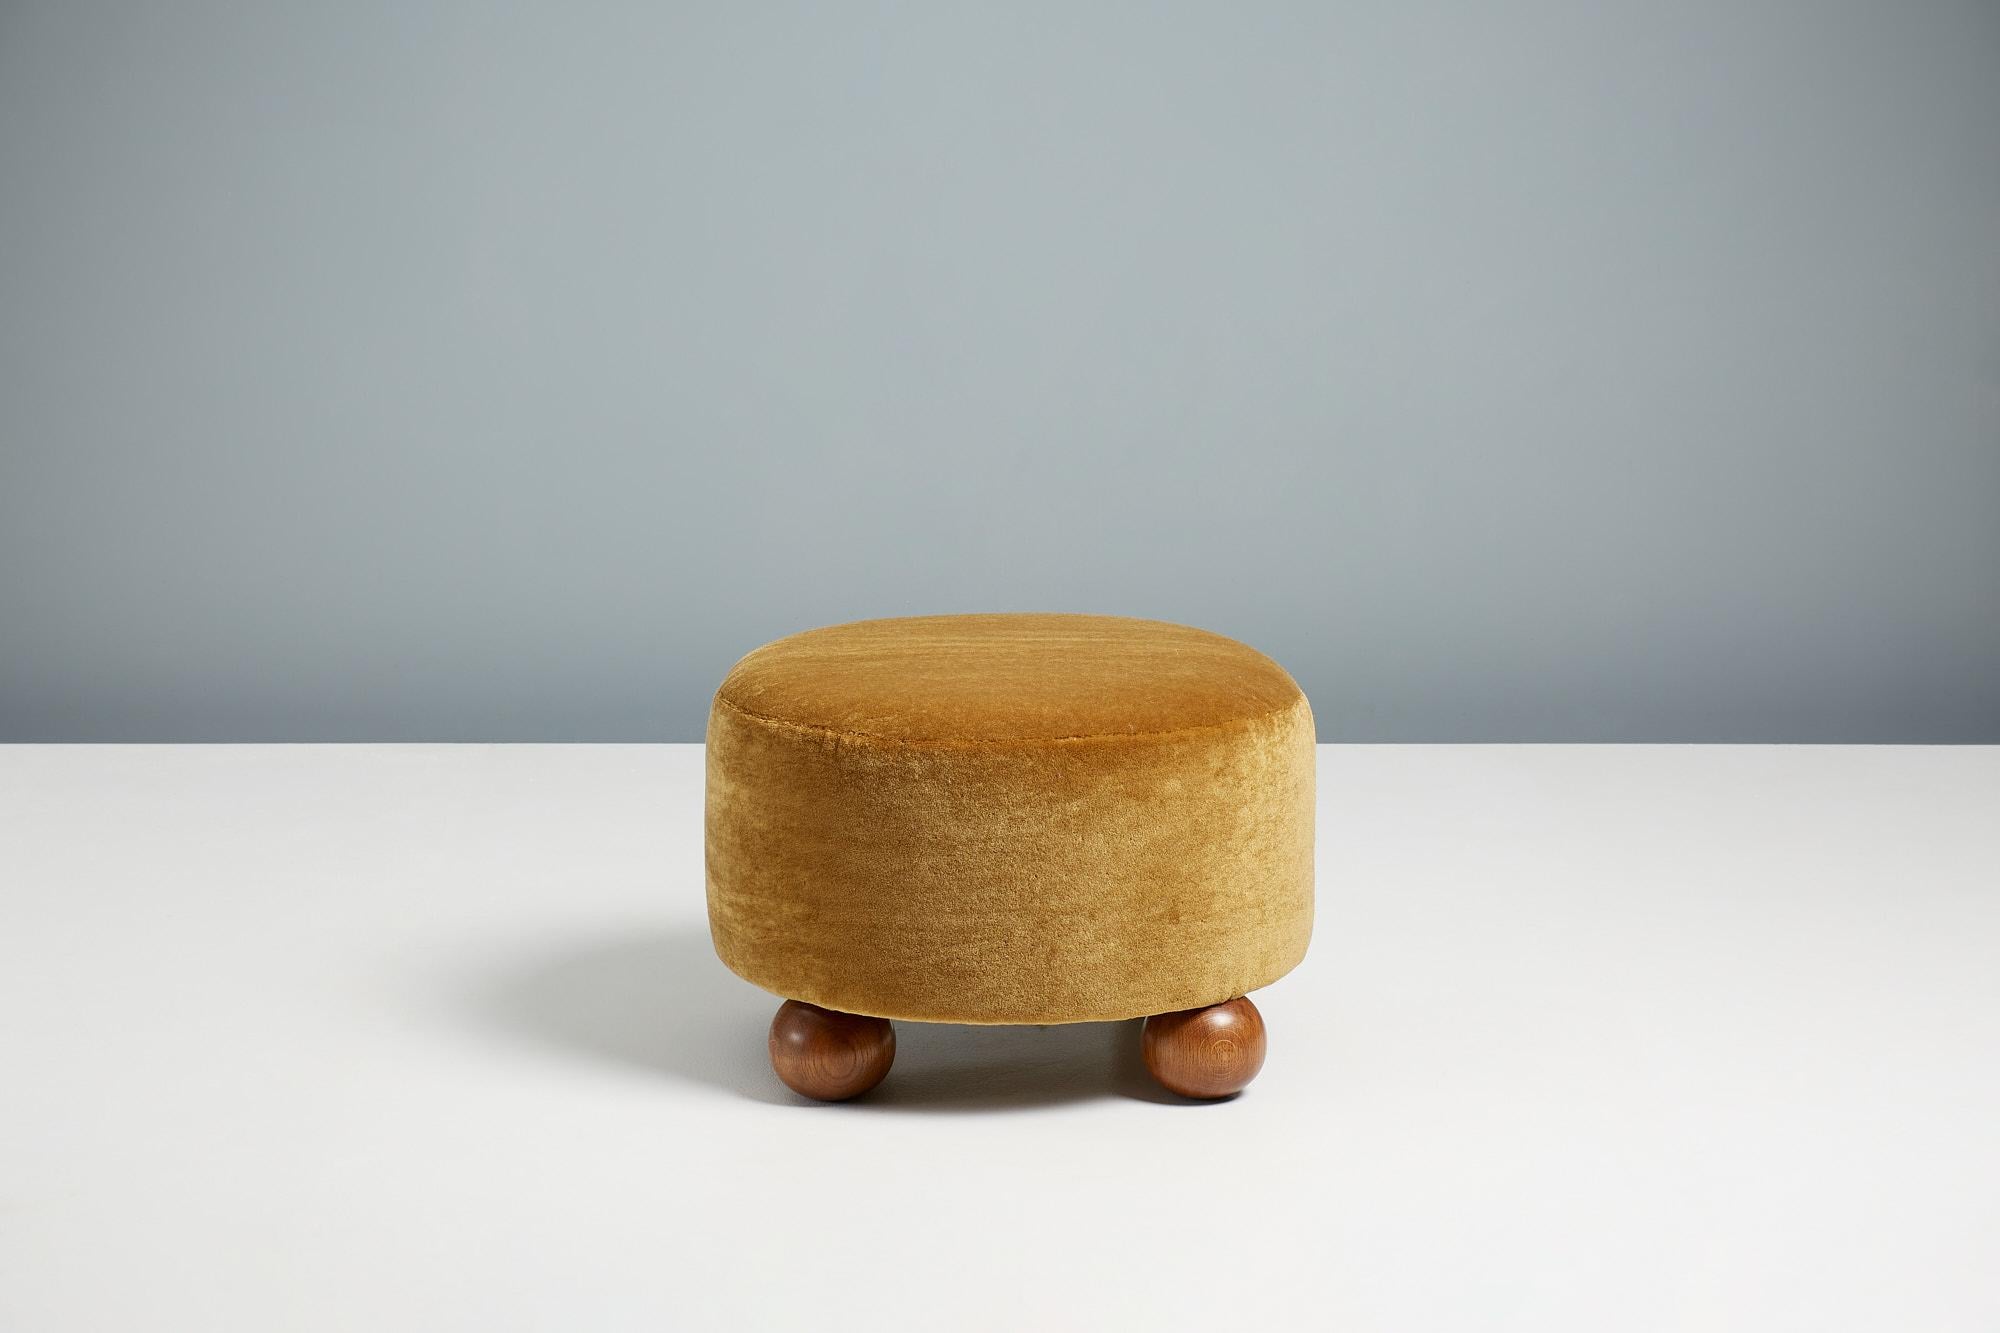 Dagmar - Luupo Round Ottoman

Custom-made ottoman developed & produced at our workshops in London using the highest quality materials. This examples are upholstered in a mustard mohair velvet by Pierre Frey with fumed oak ball feet. This ottoman is